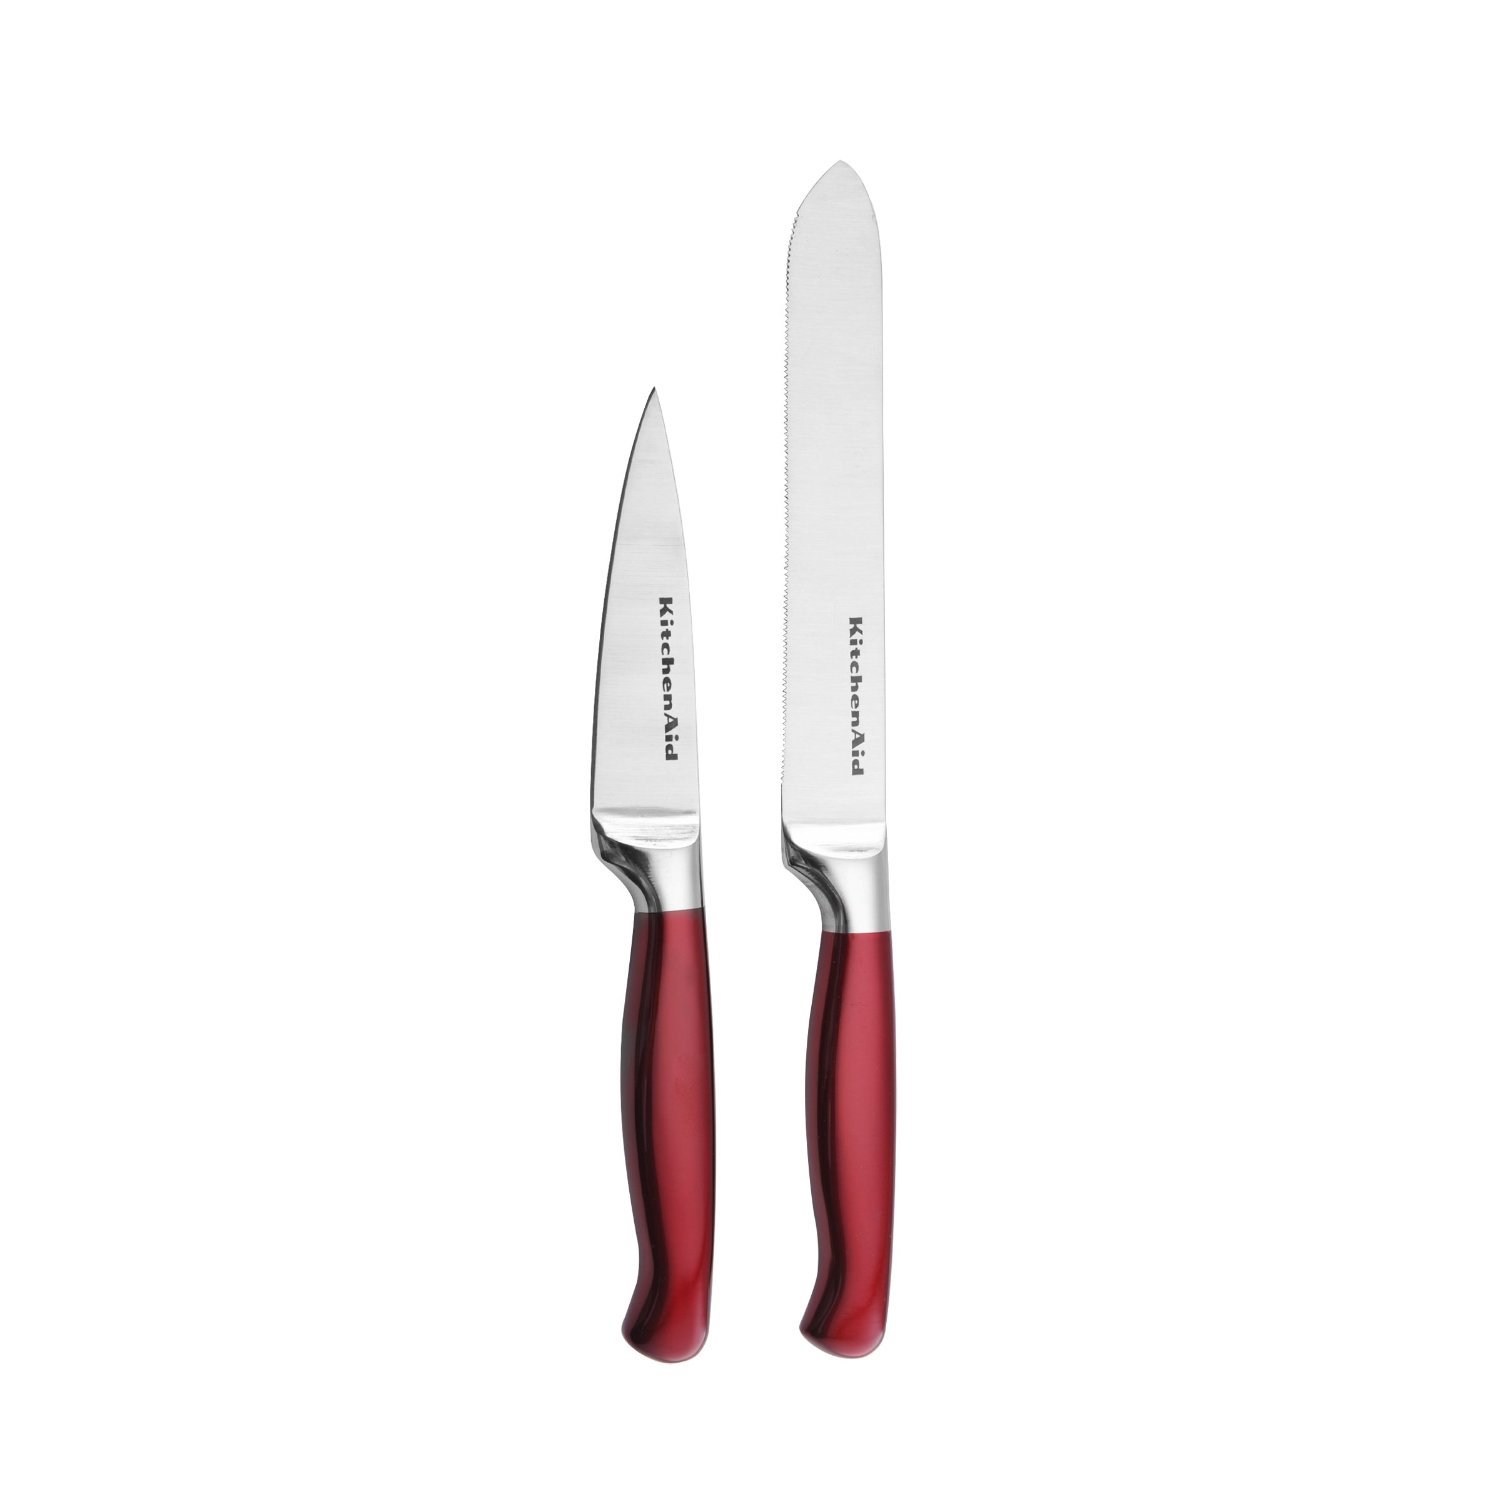 KitchenAid Candy Apple Red Fruit and Veggie Cutlery Set - Shop